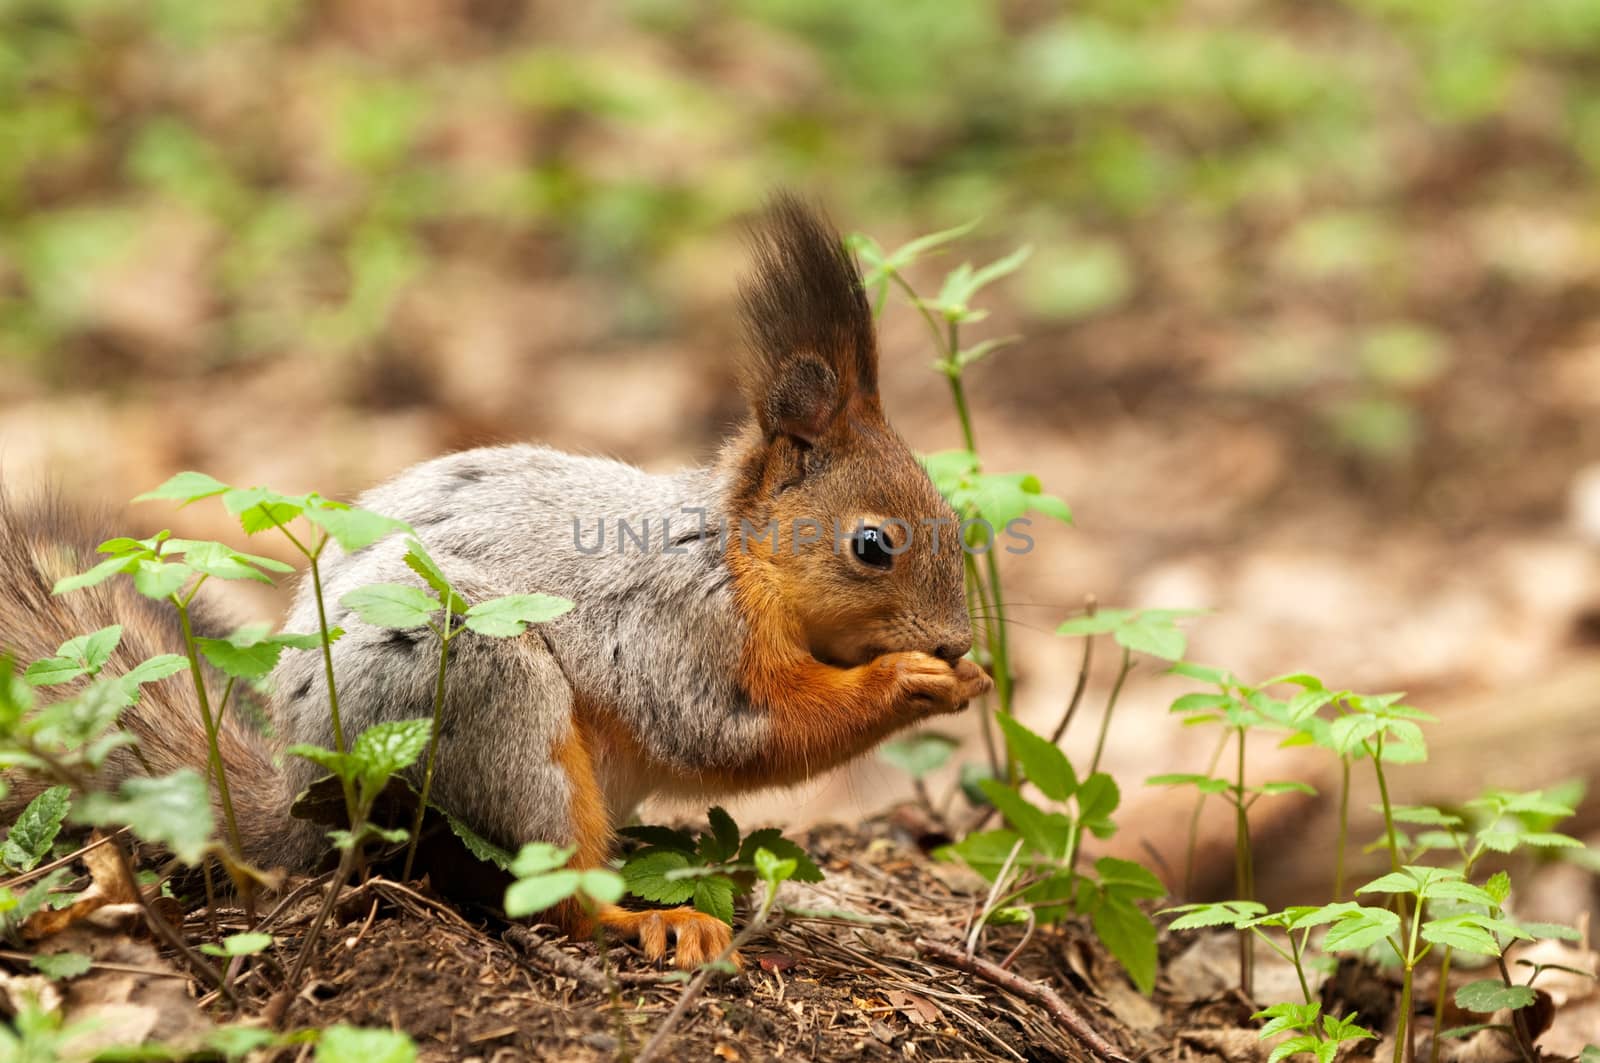 Little squirrel eating nut in park at spring by lexan